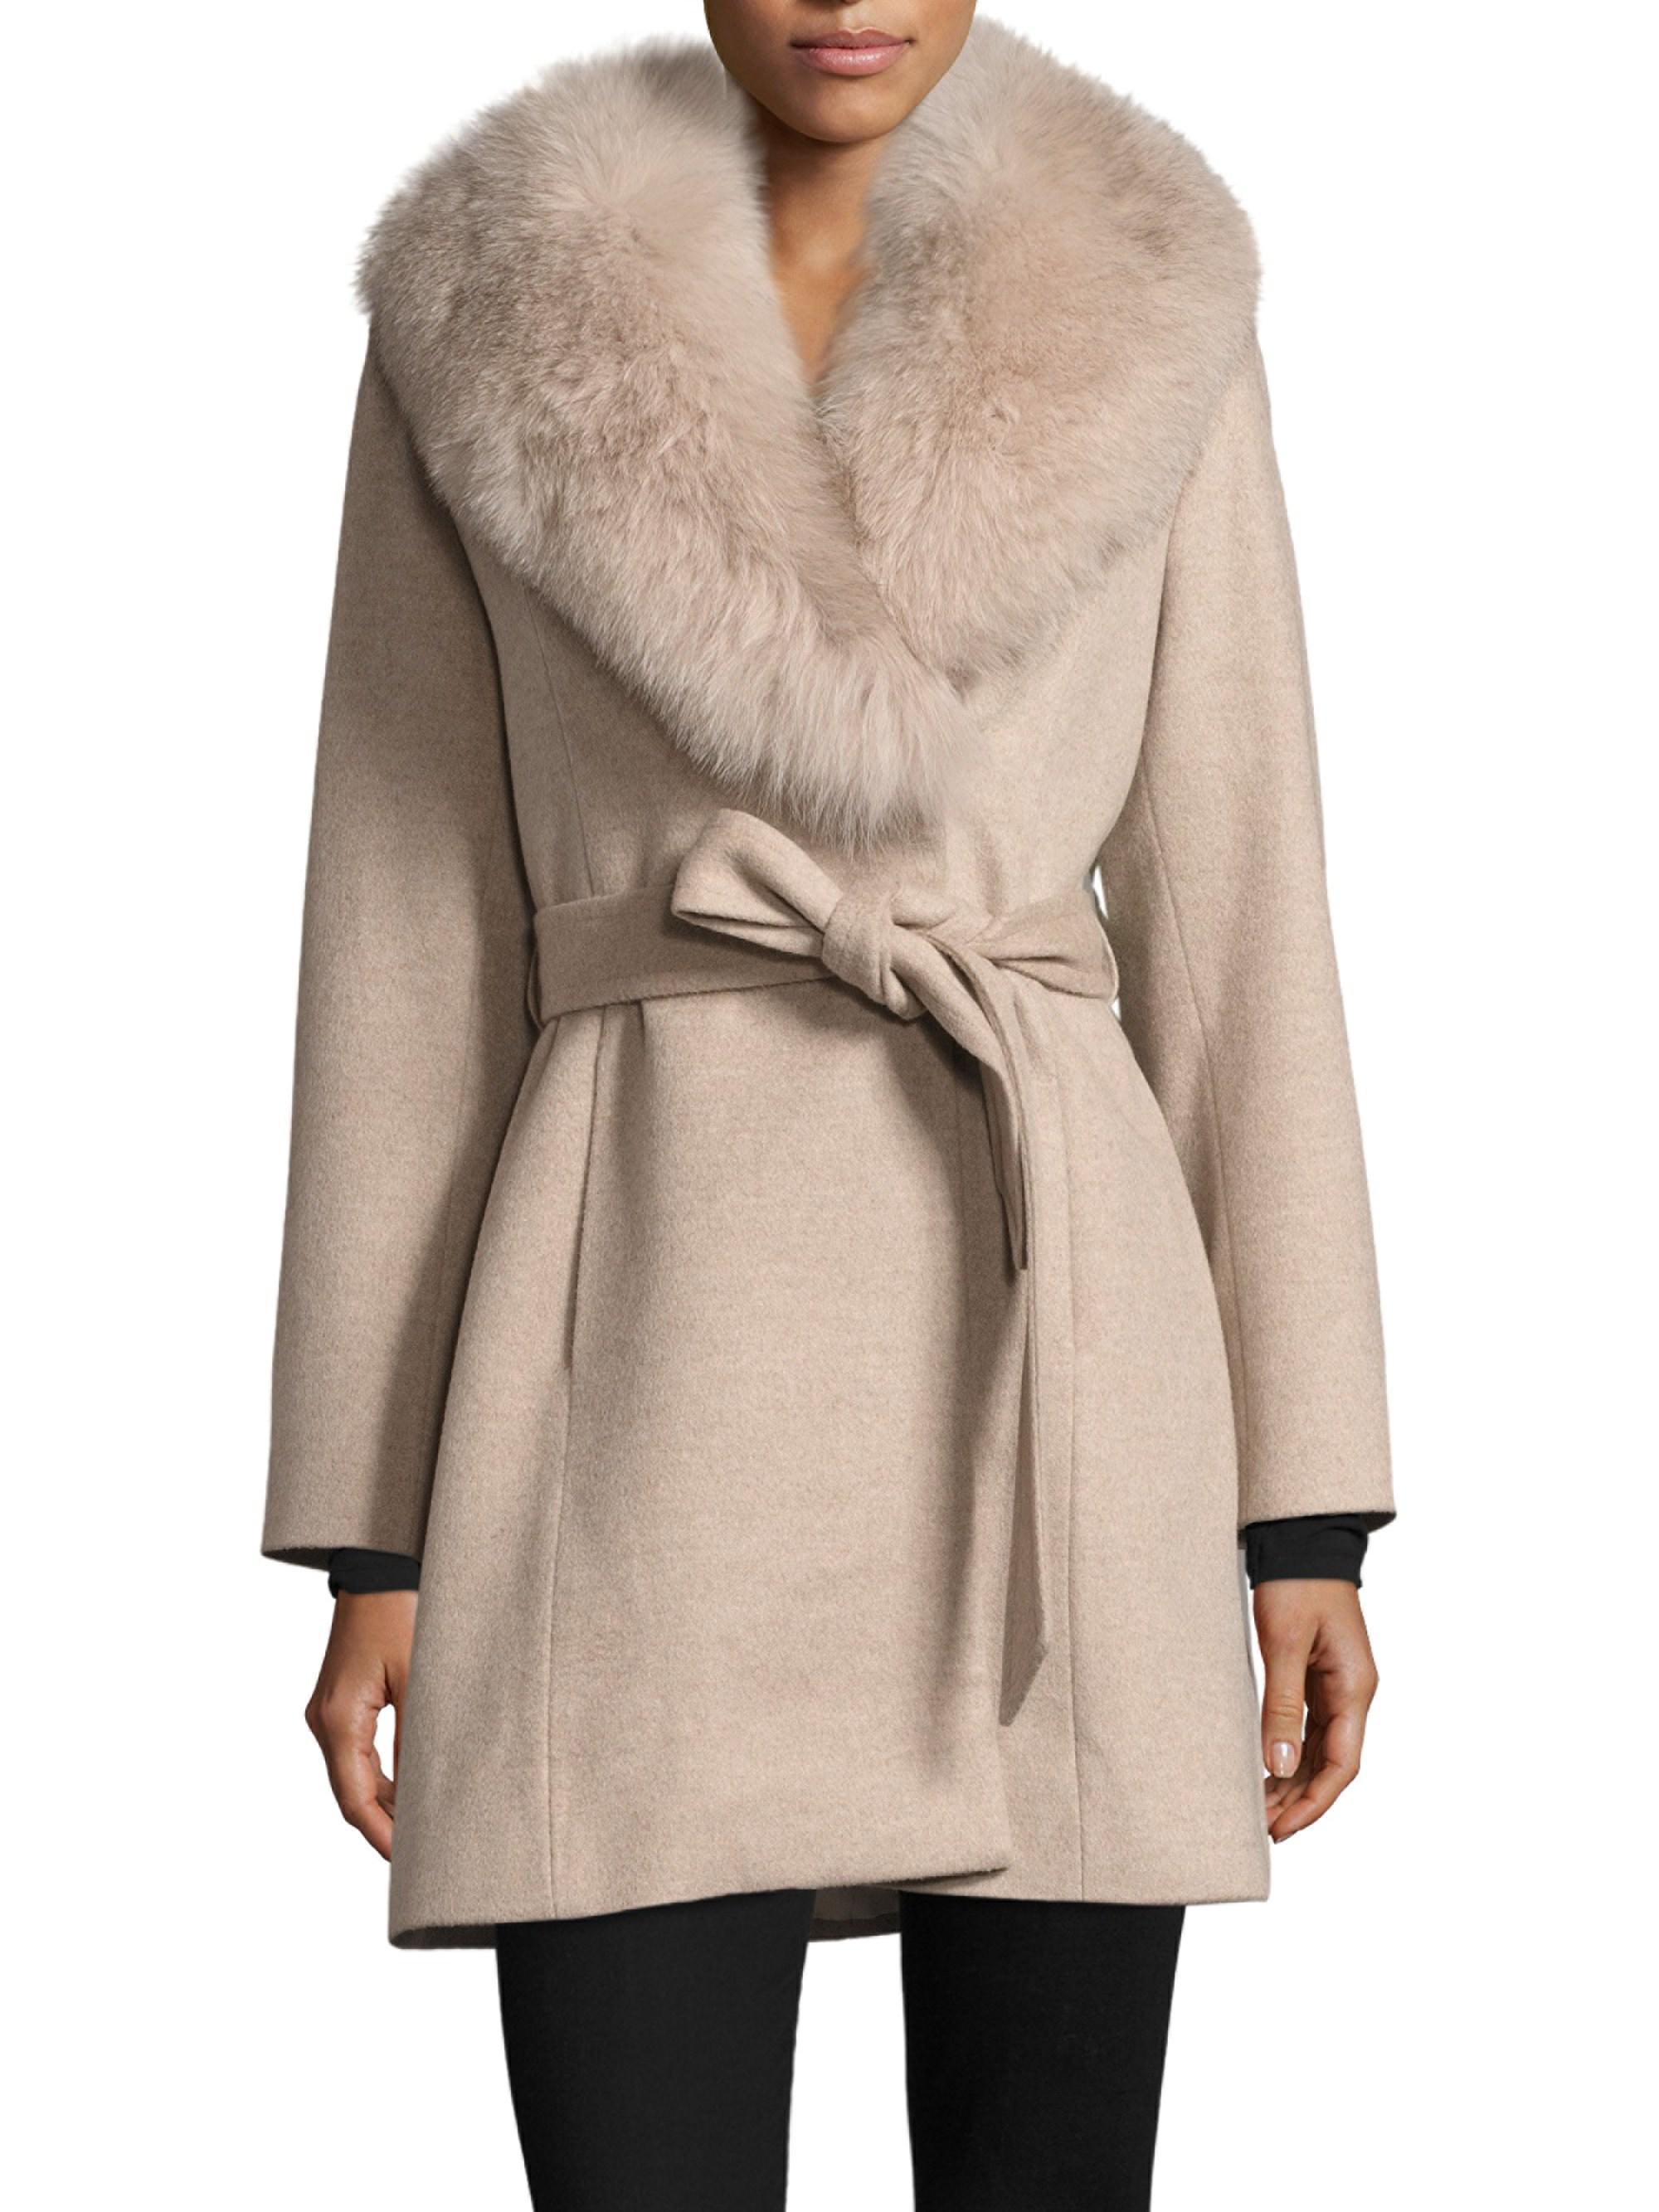 Sofia Cashmere Fox Fur-trimmed Wool Wrap Coat in Natural | Lyst